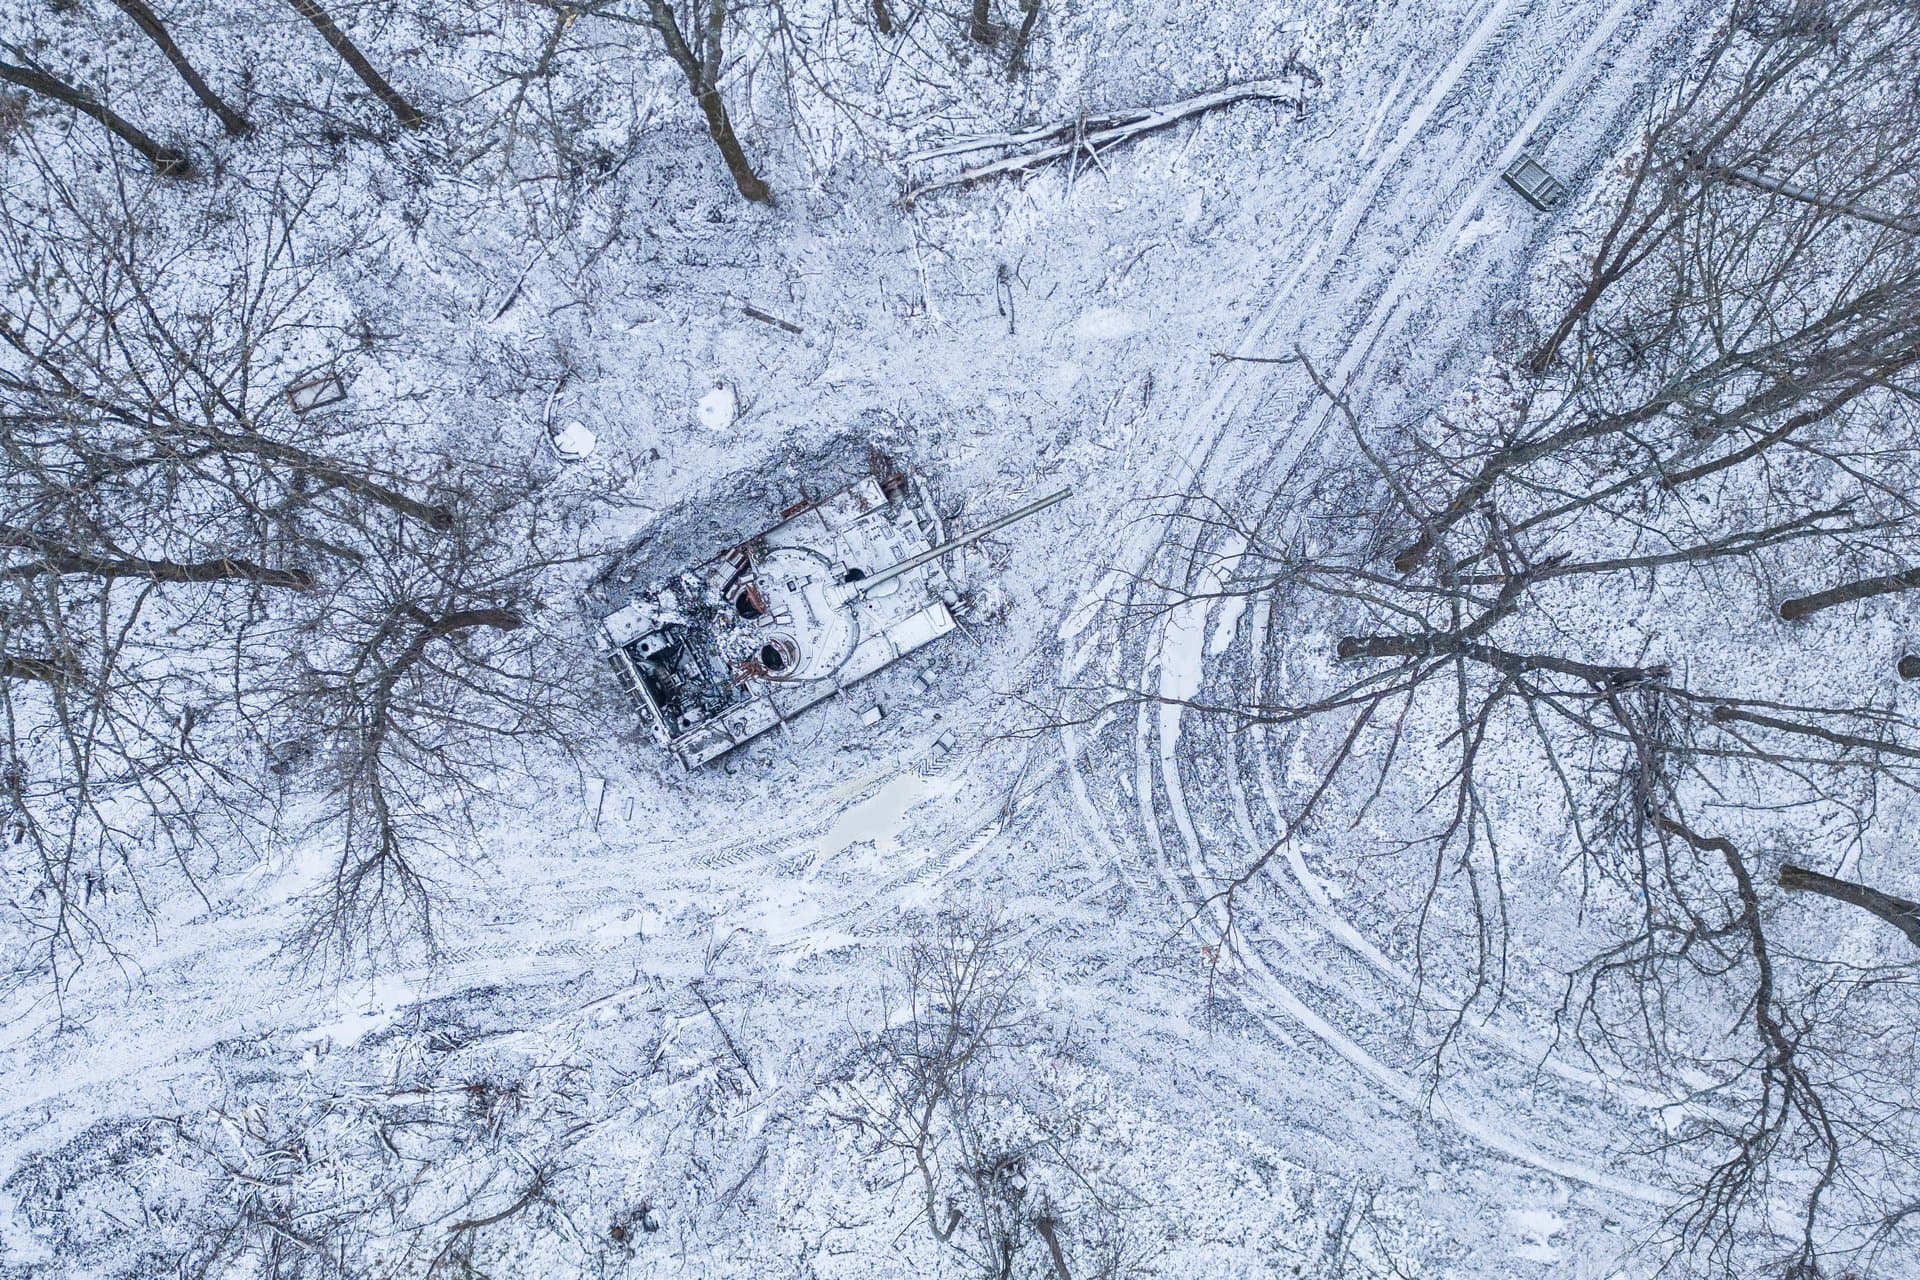 A destroyed Russian tank covered by snow in a forest in the Kharkiv region